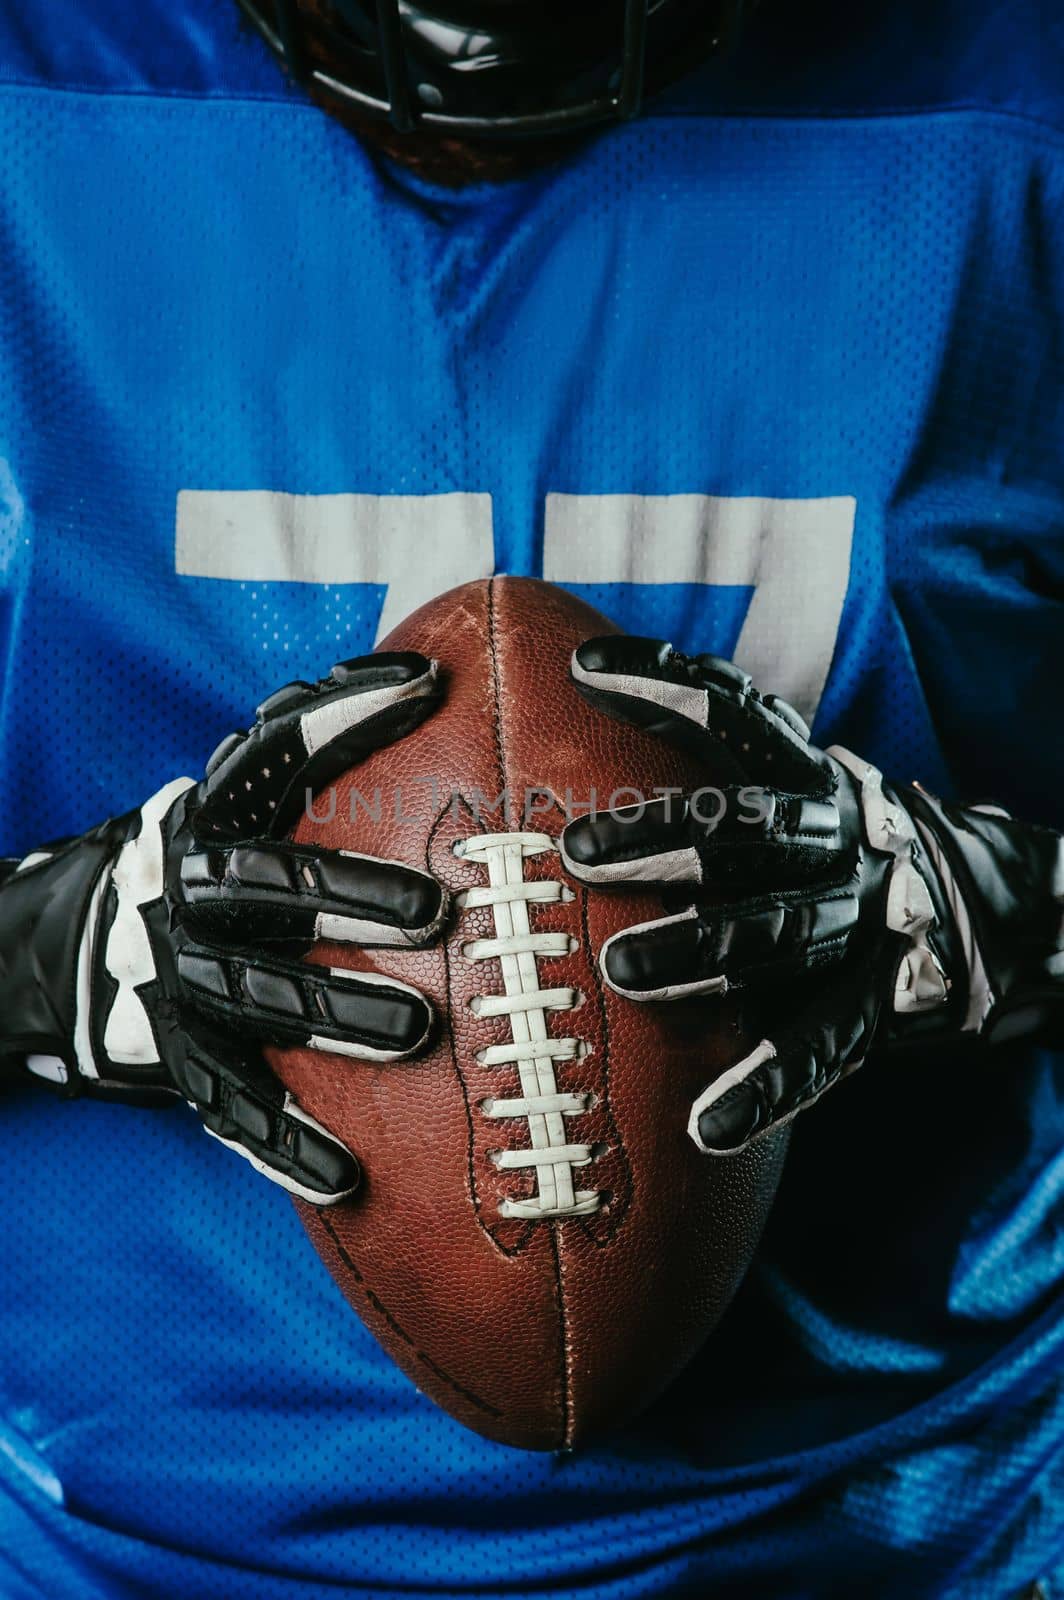 A close-up of an American football ball in the hands of a player